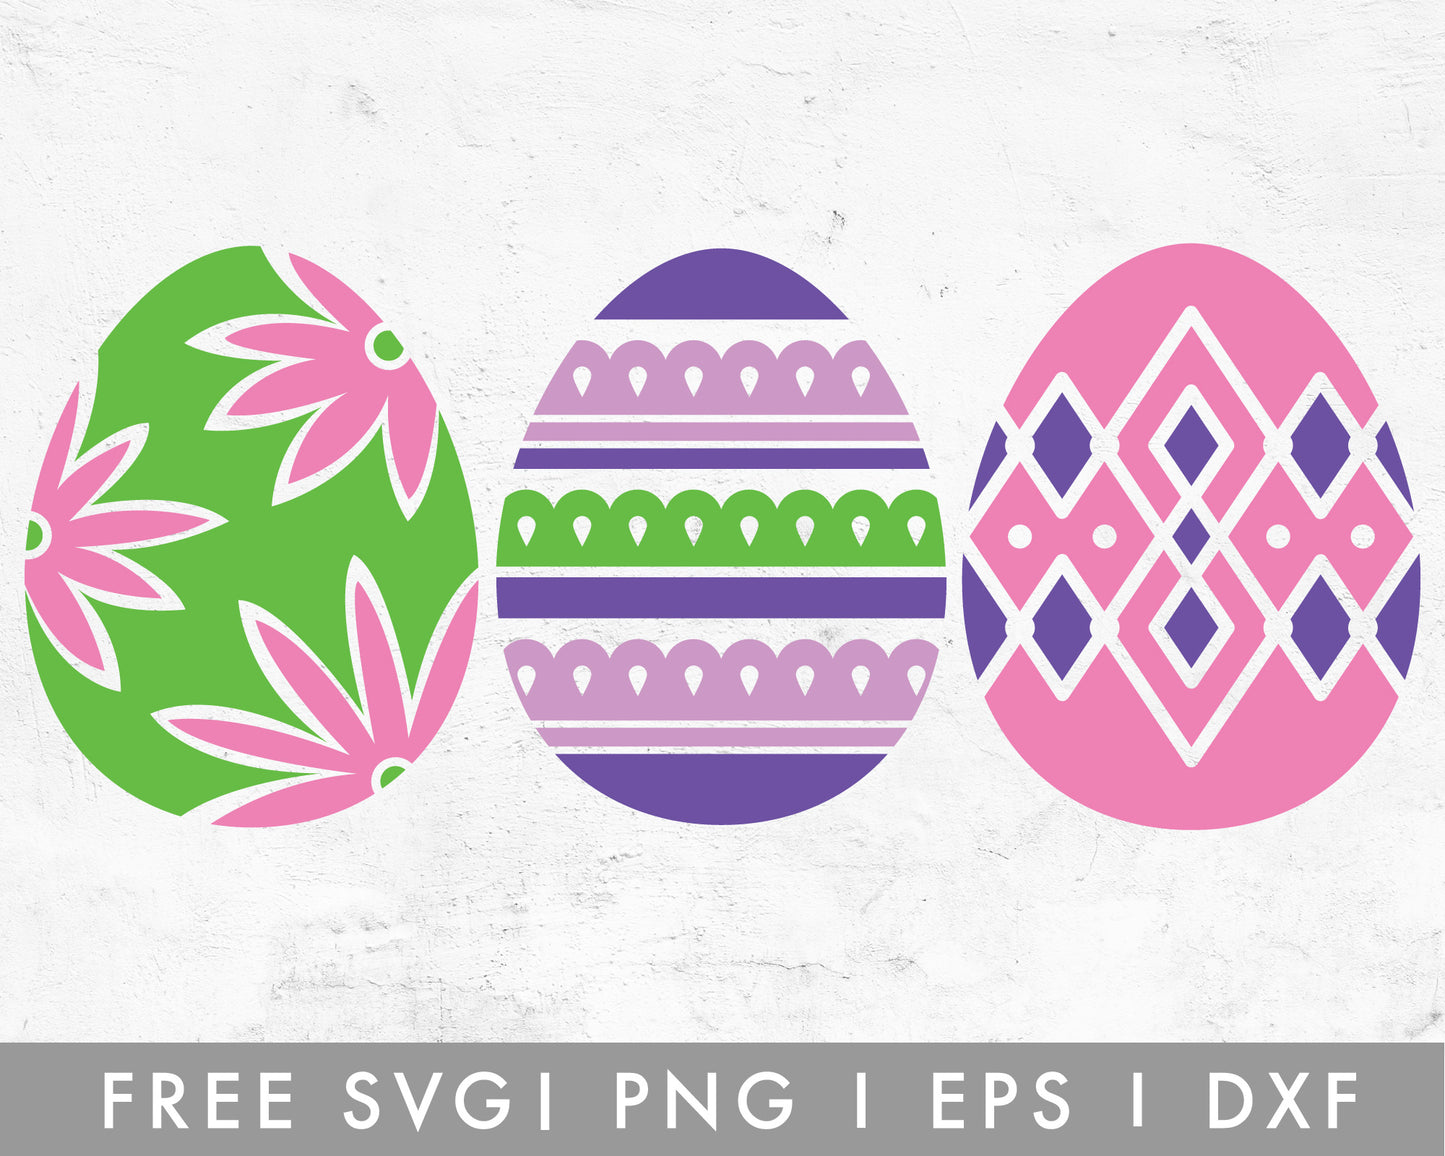 FREE Patterned Easter Egg SVG Cut File for Cricut, Cameo Silhouette | Free SVG Cut File